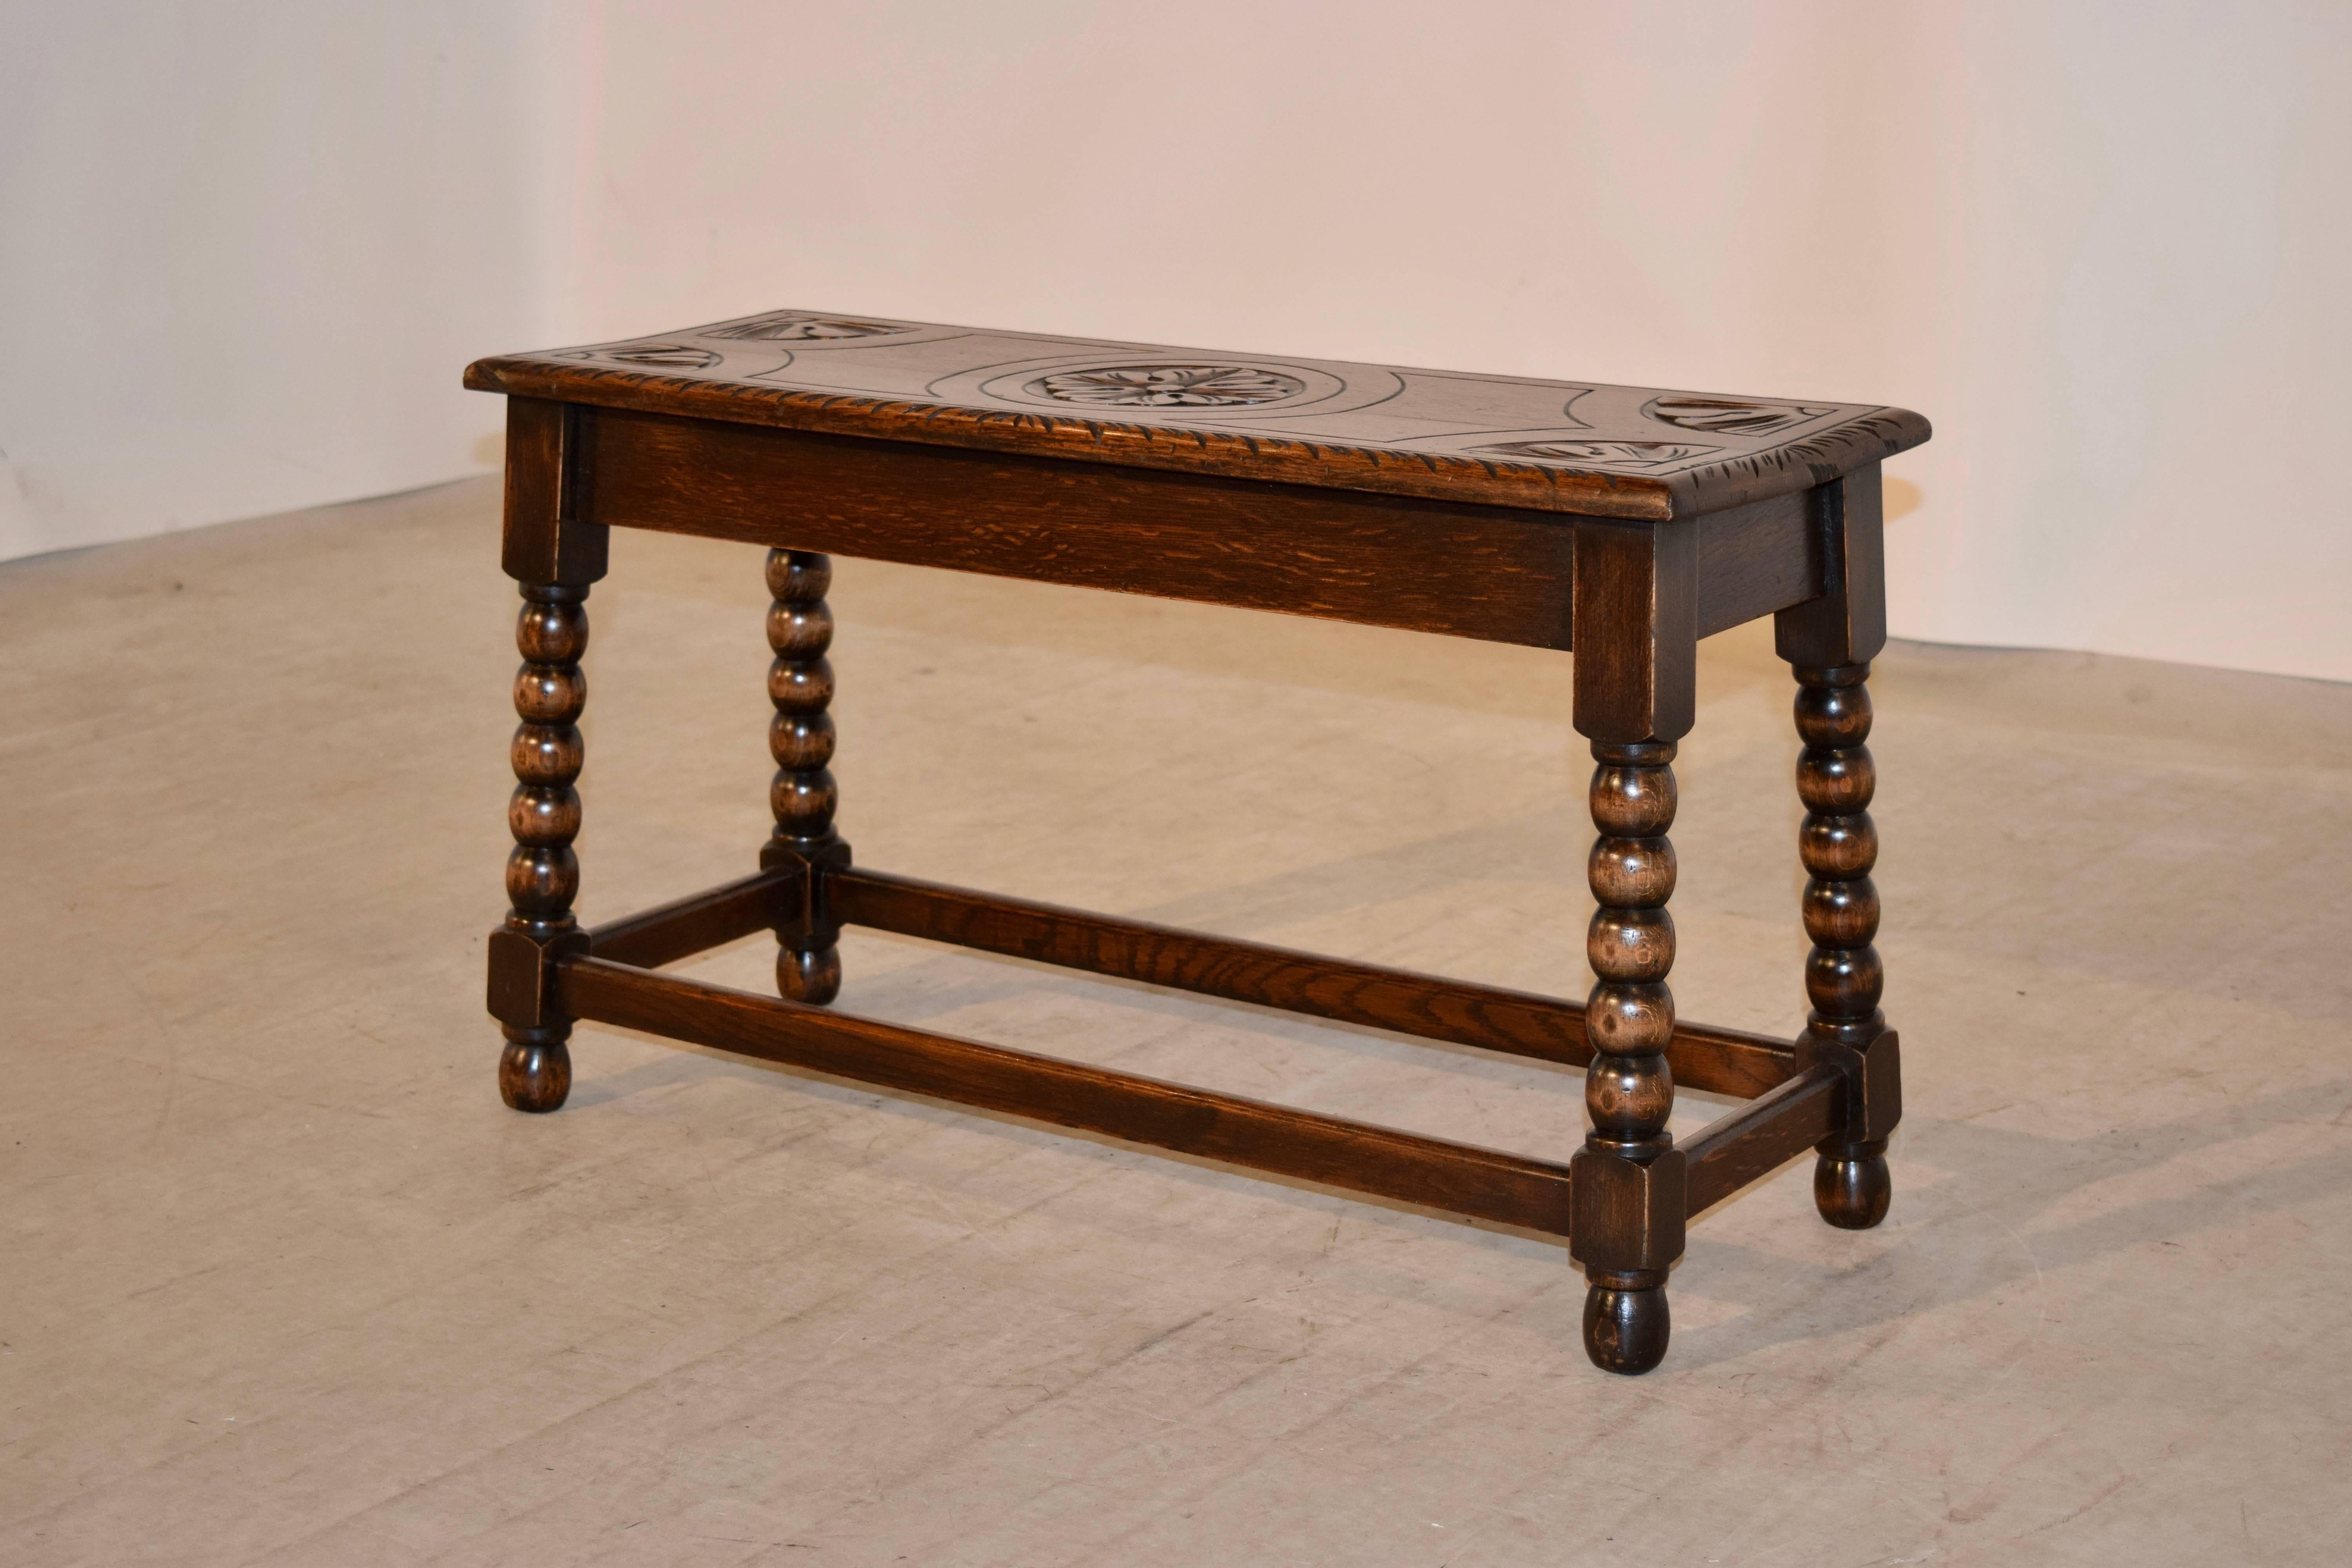 19th century English oak bench with a carved decorated top and follows down to a simple apron and supported on hand-turned legs, which are splayed and joined by simple stretchers. The bench is raised on hand-turned feet.